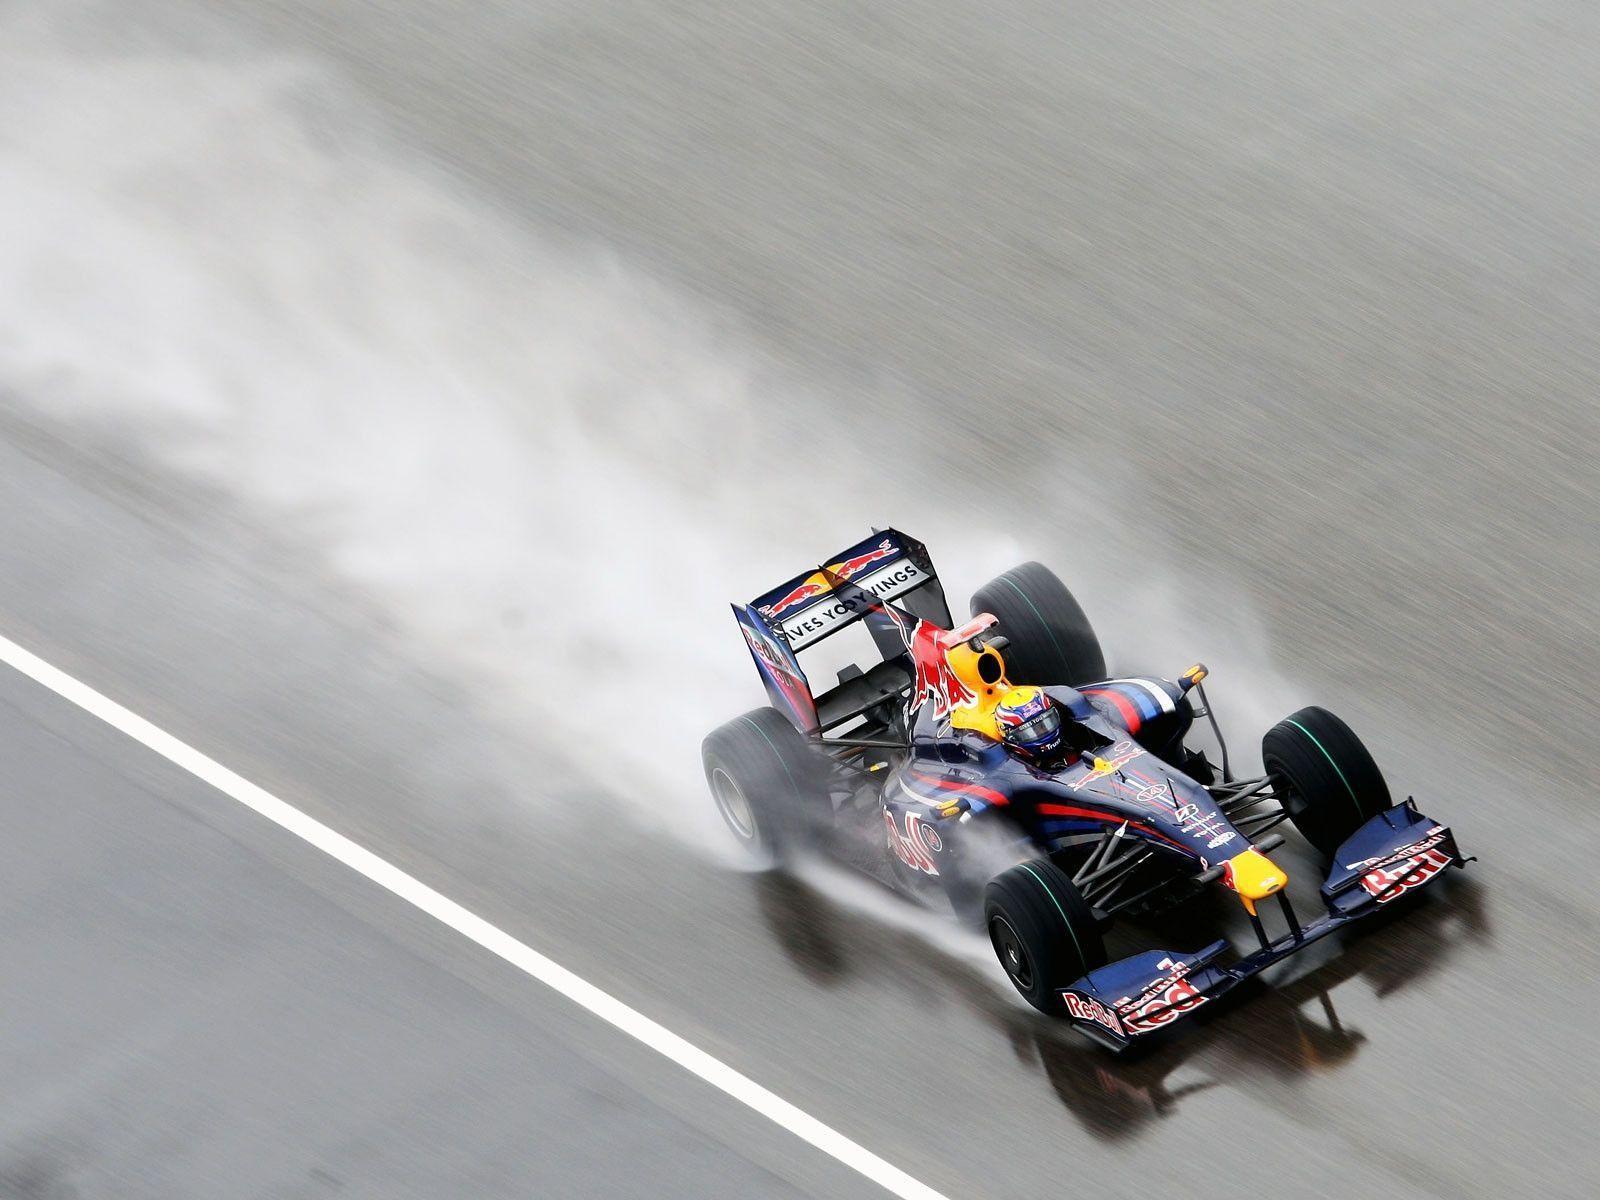 Red Bull Racing : Desktop and mobile wallpapers : Wallippo